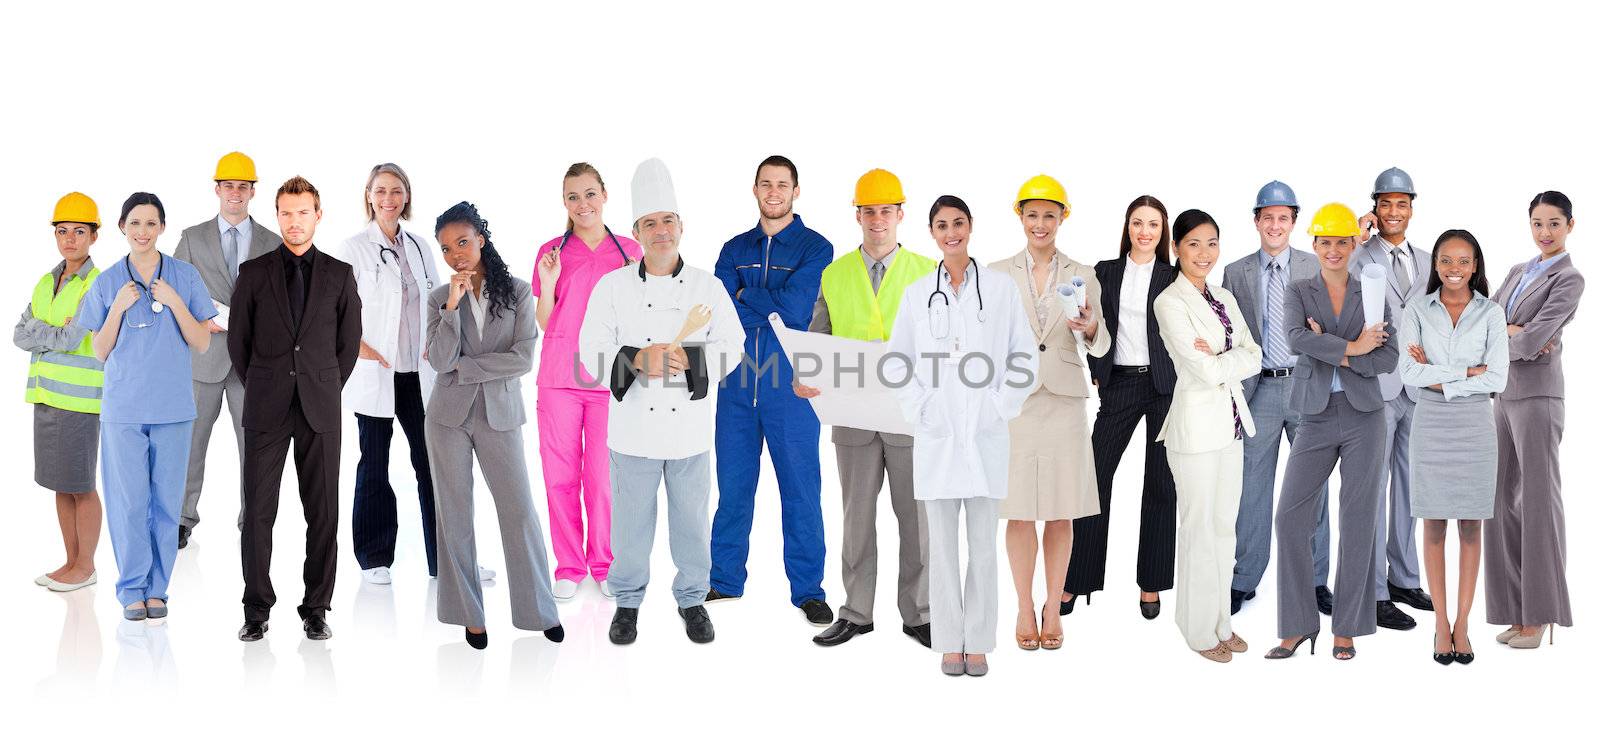 Large diverse group of workers by Wavebreakmedia